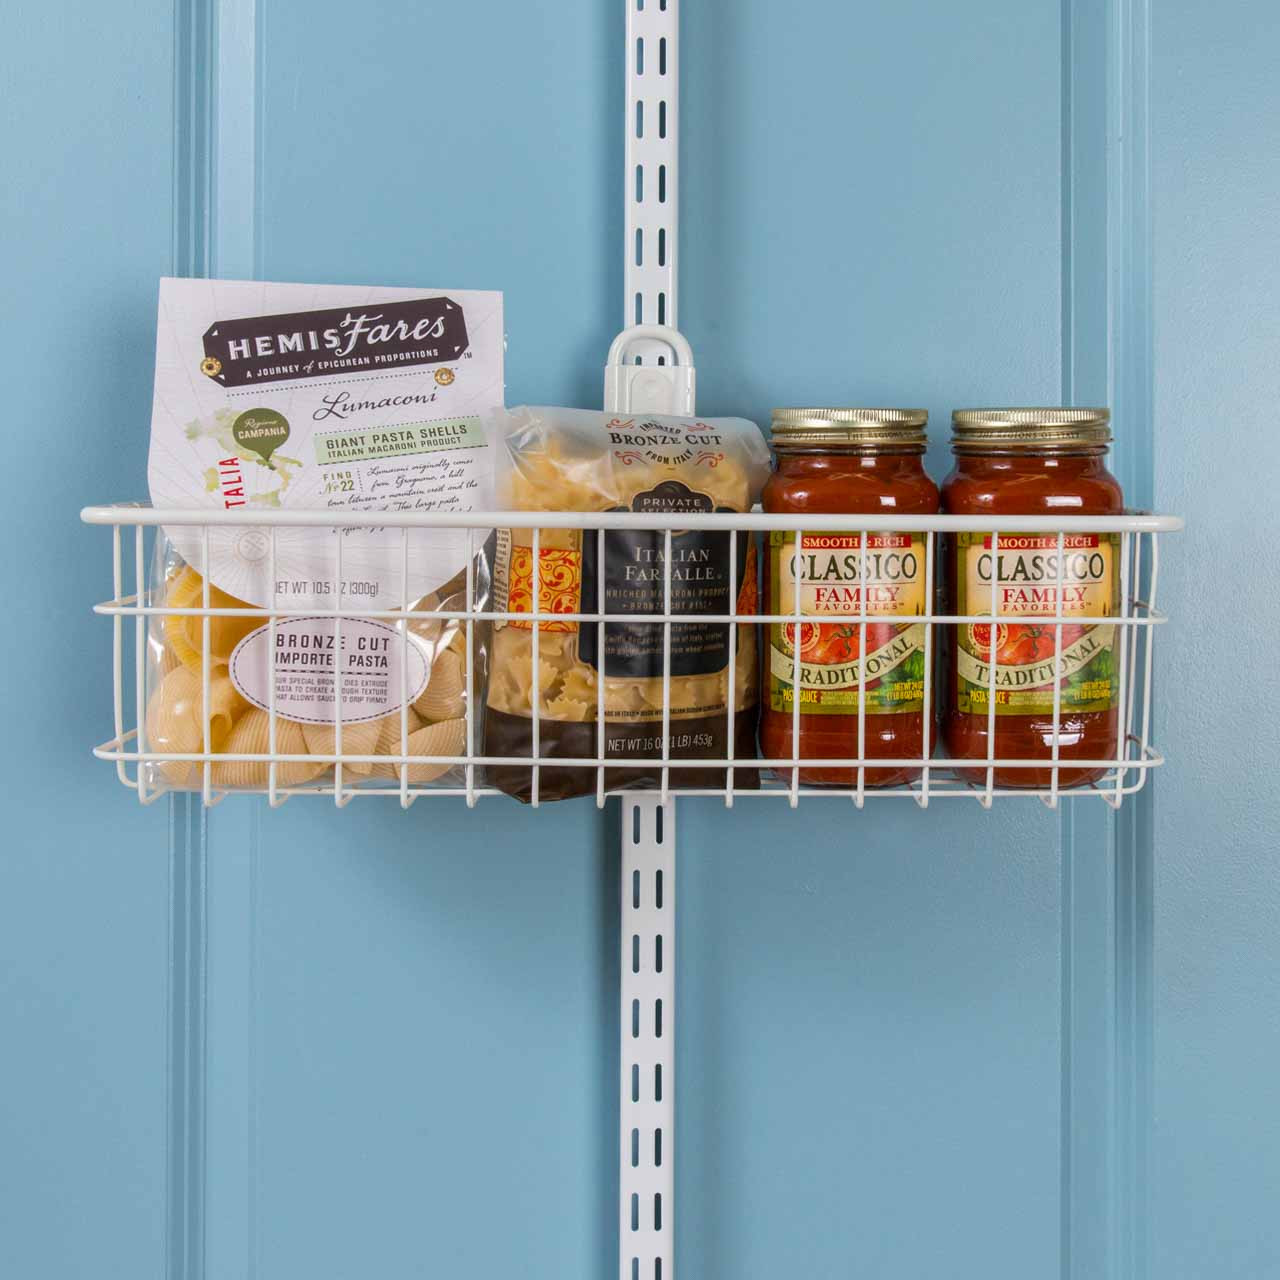 This Renter-Approved Over-the-Door Pantry Organizer is on Sale for $40